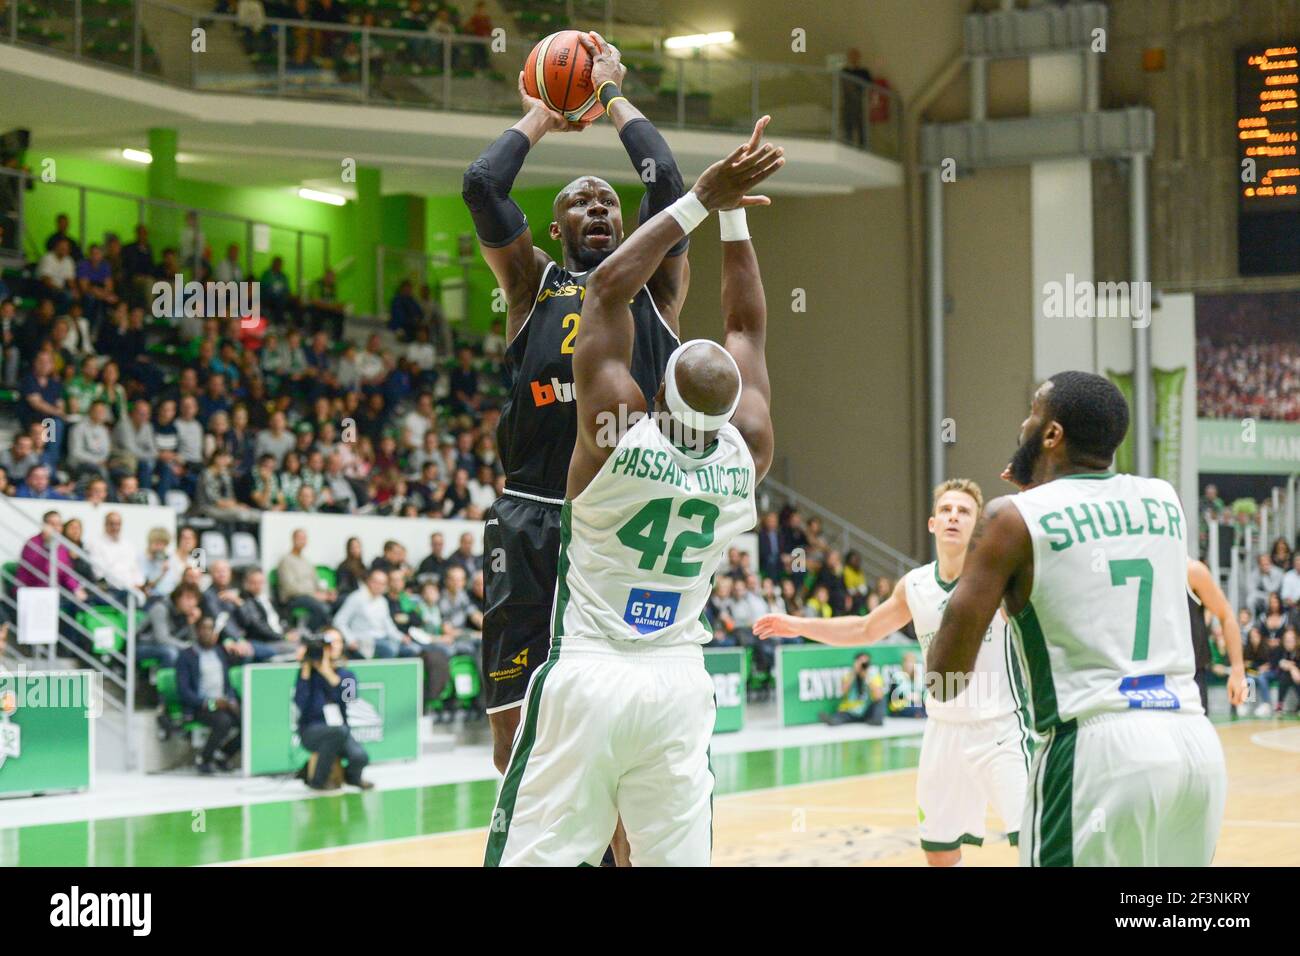 Tonye Jeriki of Oostende and Johan Passave Ducteil of Nanterre 92 during  the Basketball Champions League, Group D, match between Nanterre 92 and  Oostende on November 1, 2017 at Palais des Sports